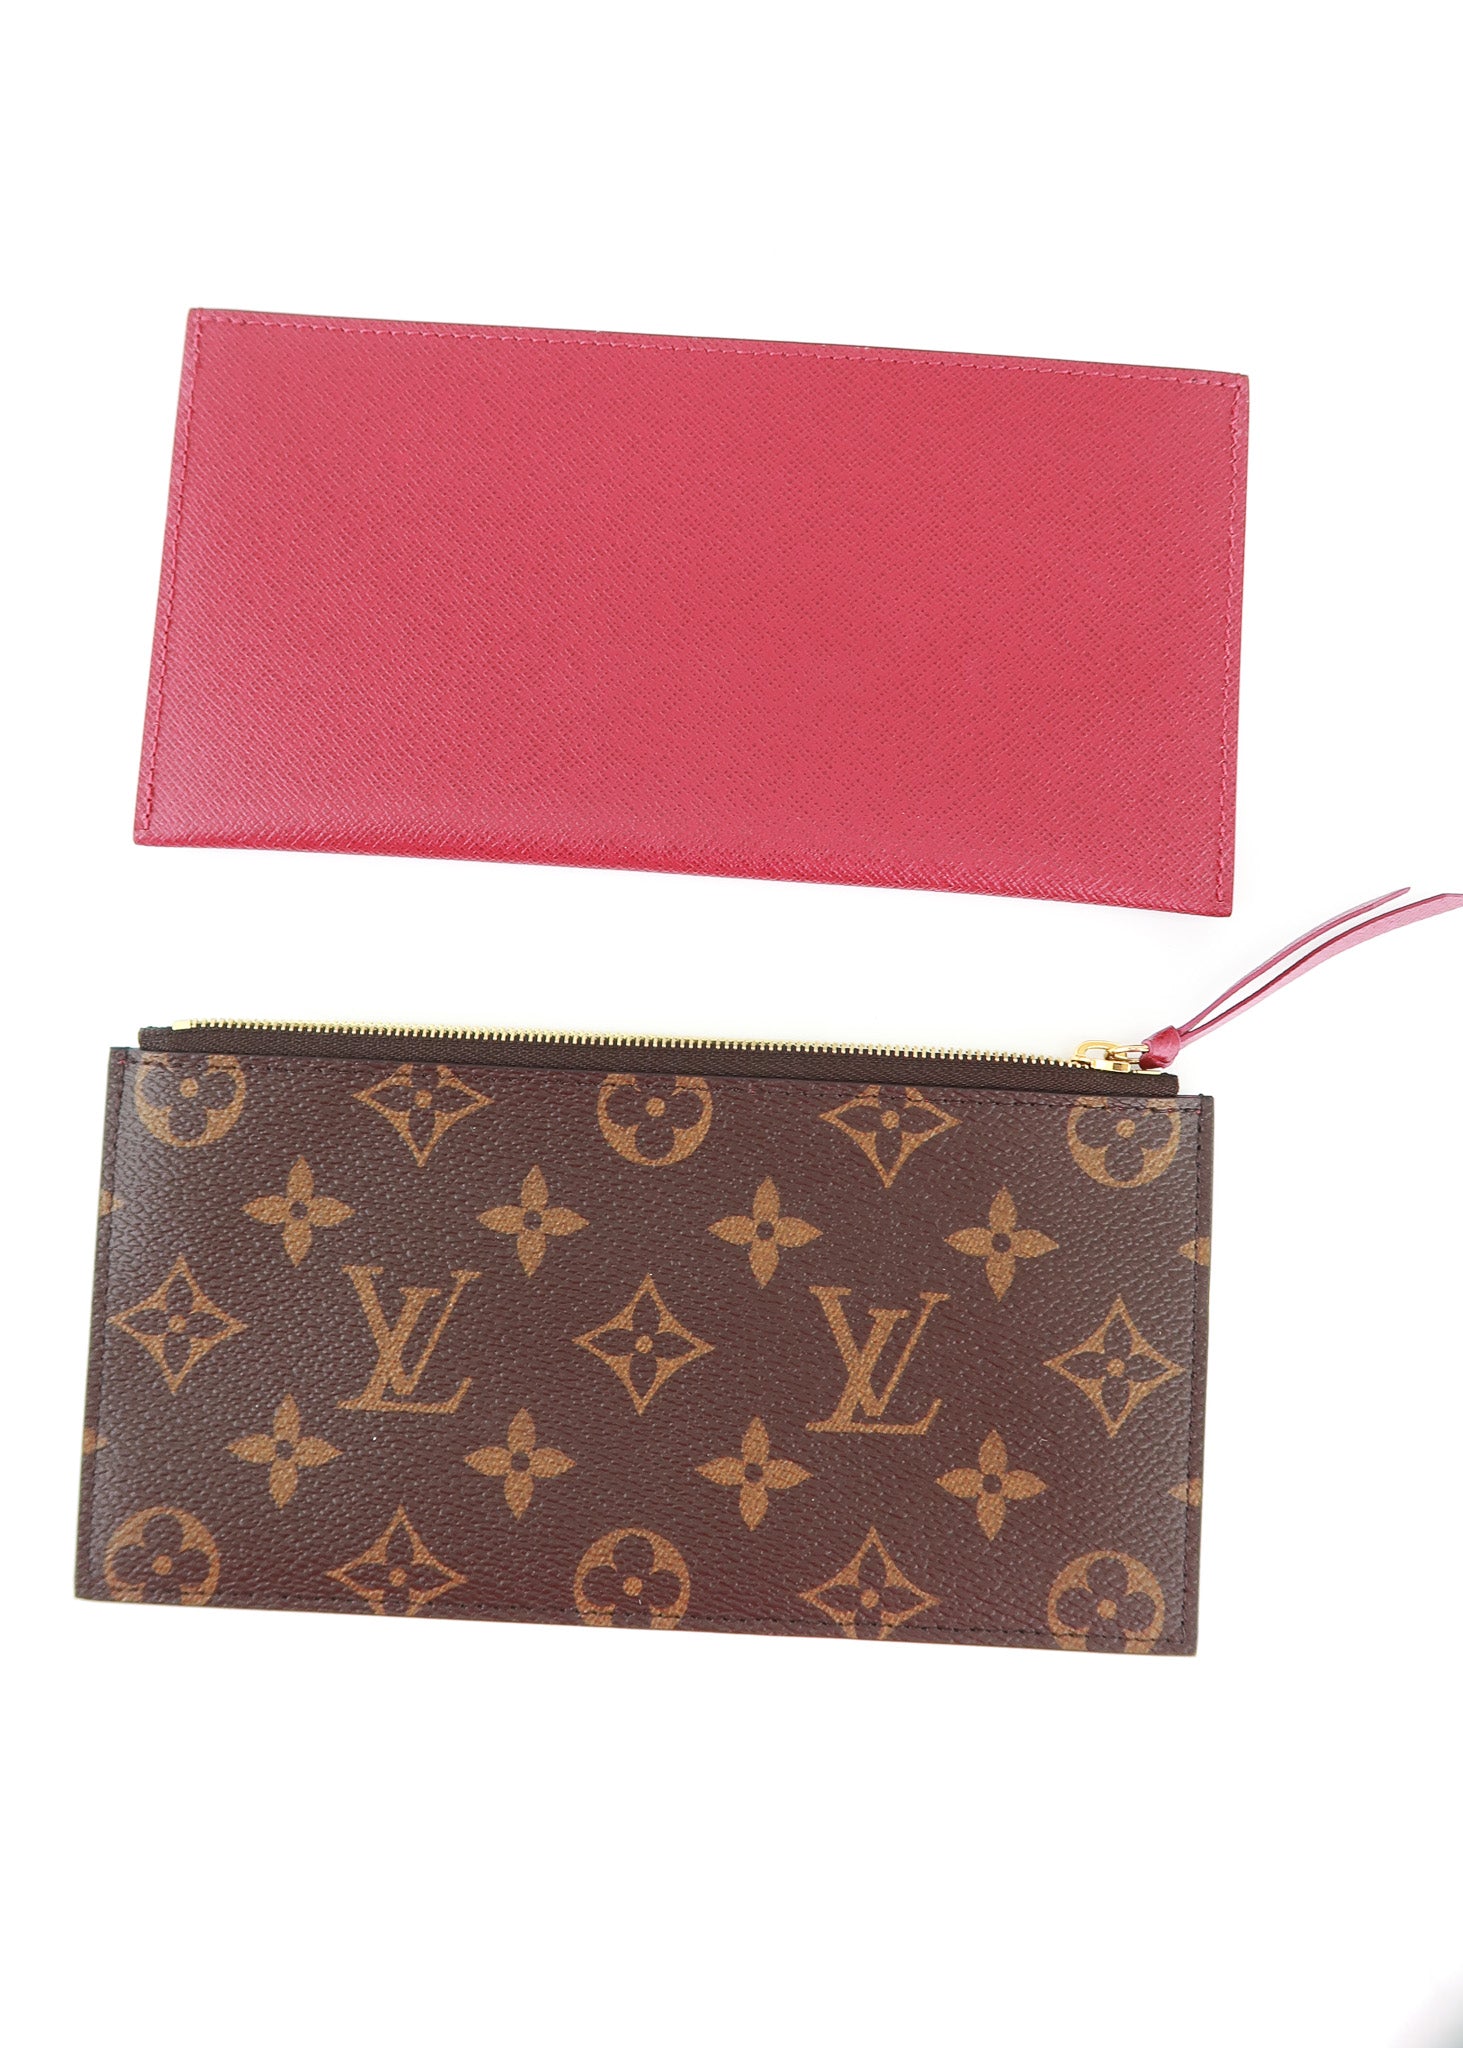 Louis Vuitton Emilie wallet. Which print & colour to choose? This one is…